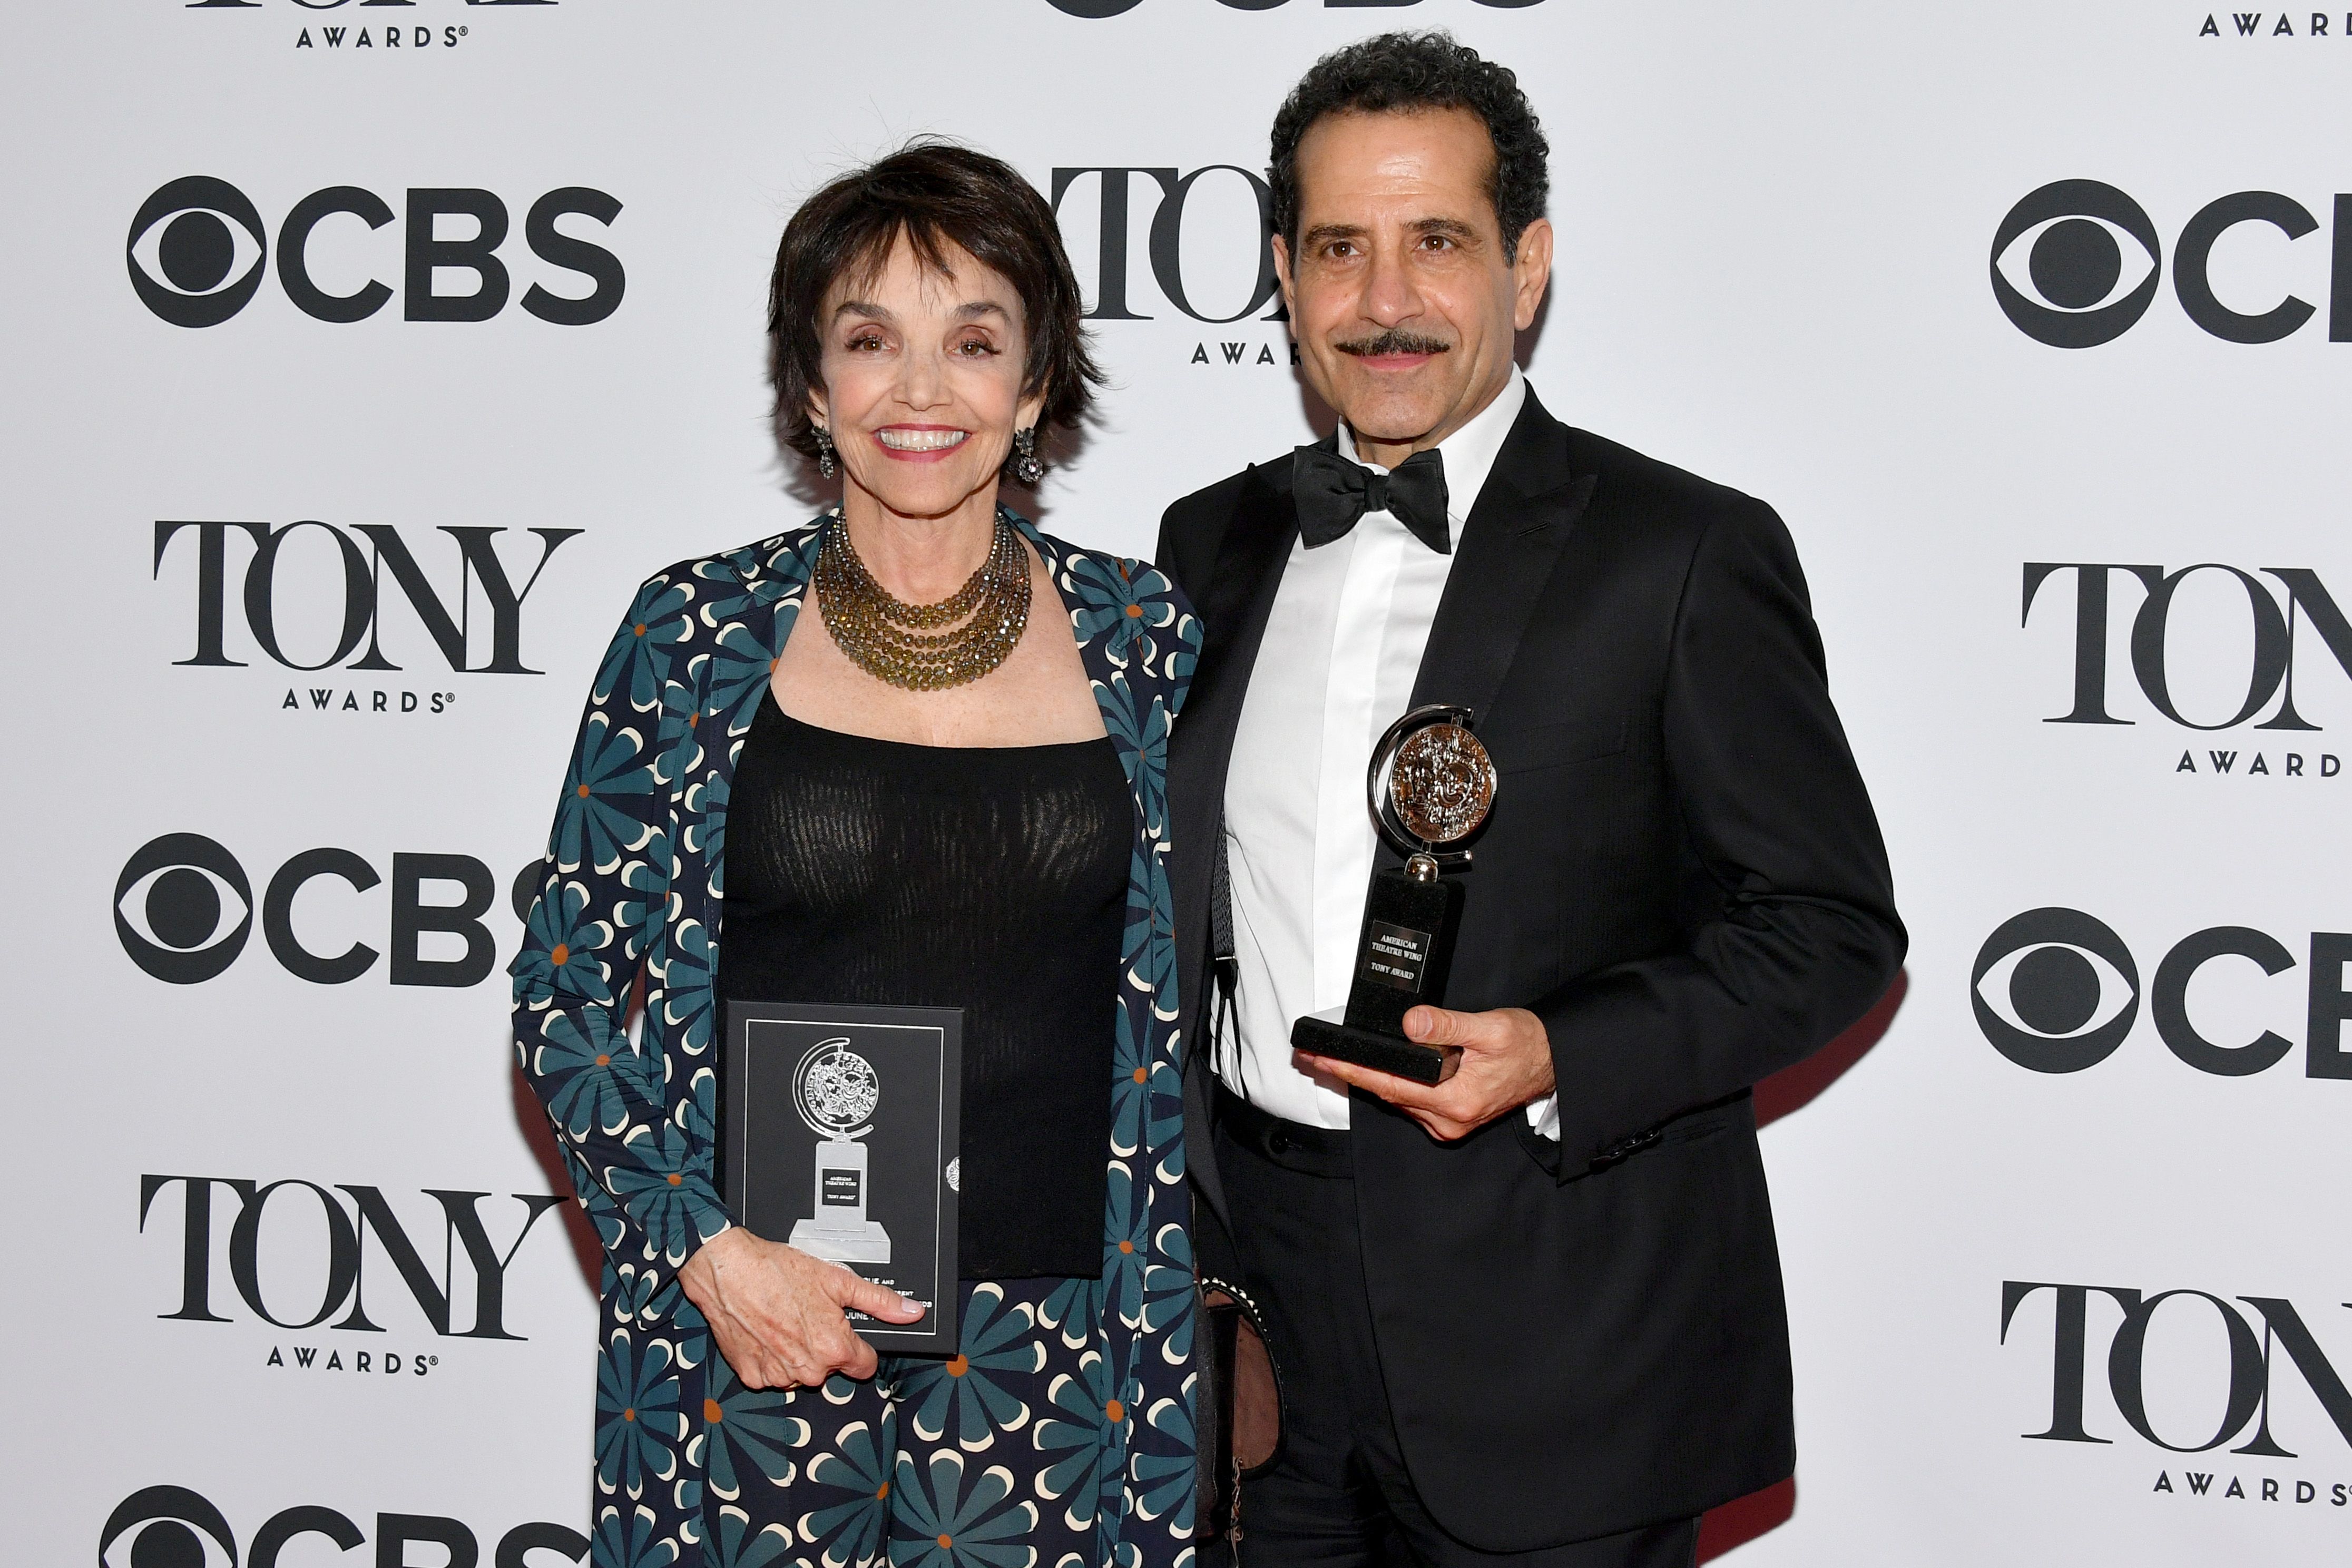  Brooke Adams and Tony Shalhoub at the 72nd Annual Tony Awards in 2018 in New York City | Source: Getty Images